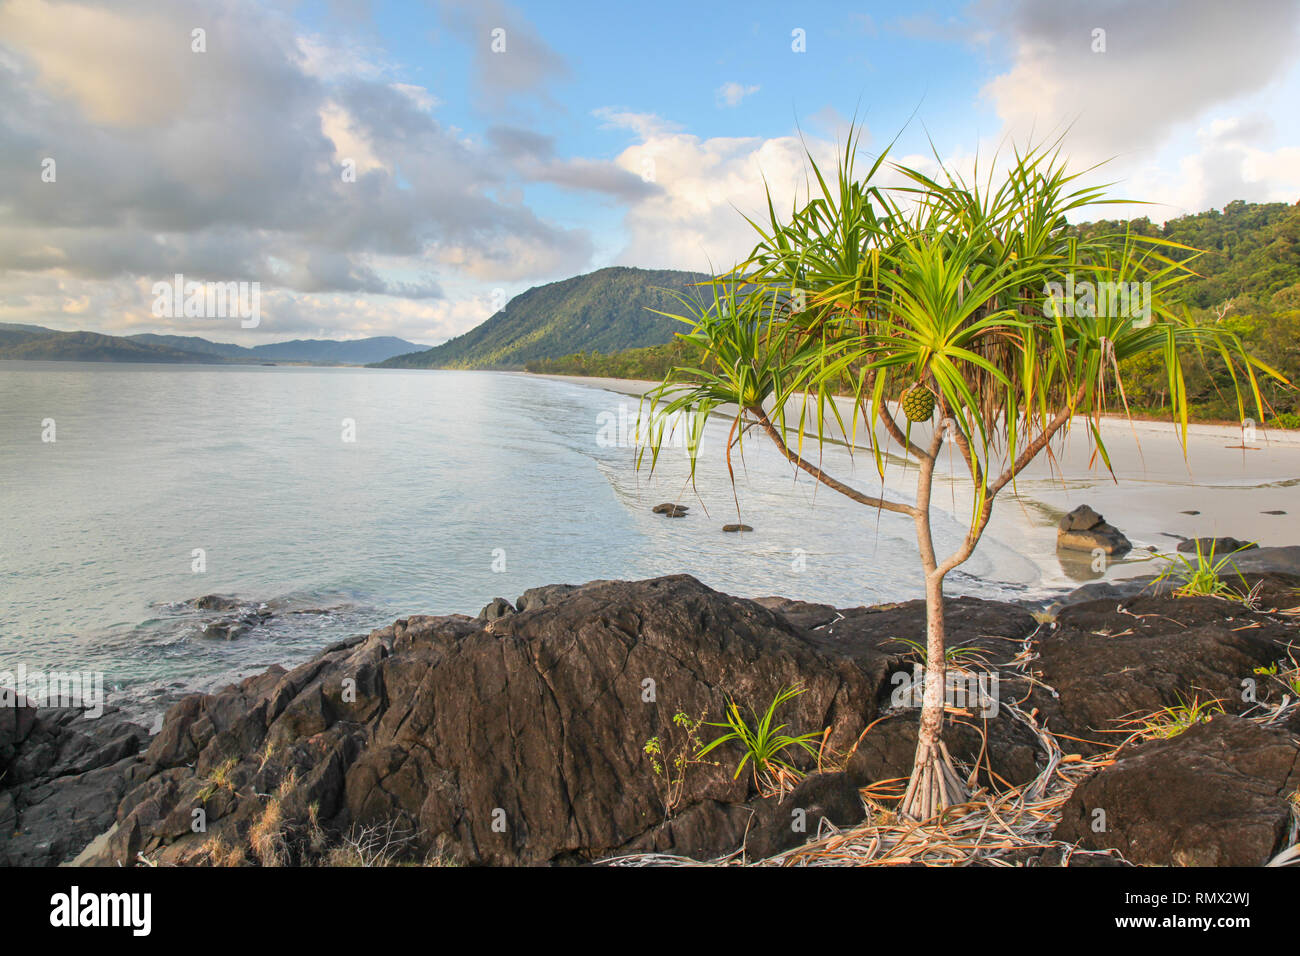 A Pandanus tree growing on the rocky headland at Noah Beach - Located in the Daintree region north of Cairns in Far North Queensland Australia Stock Photo